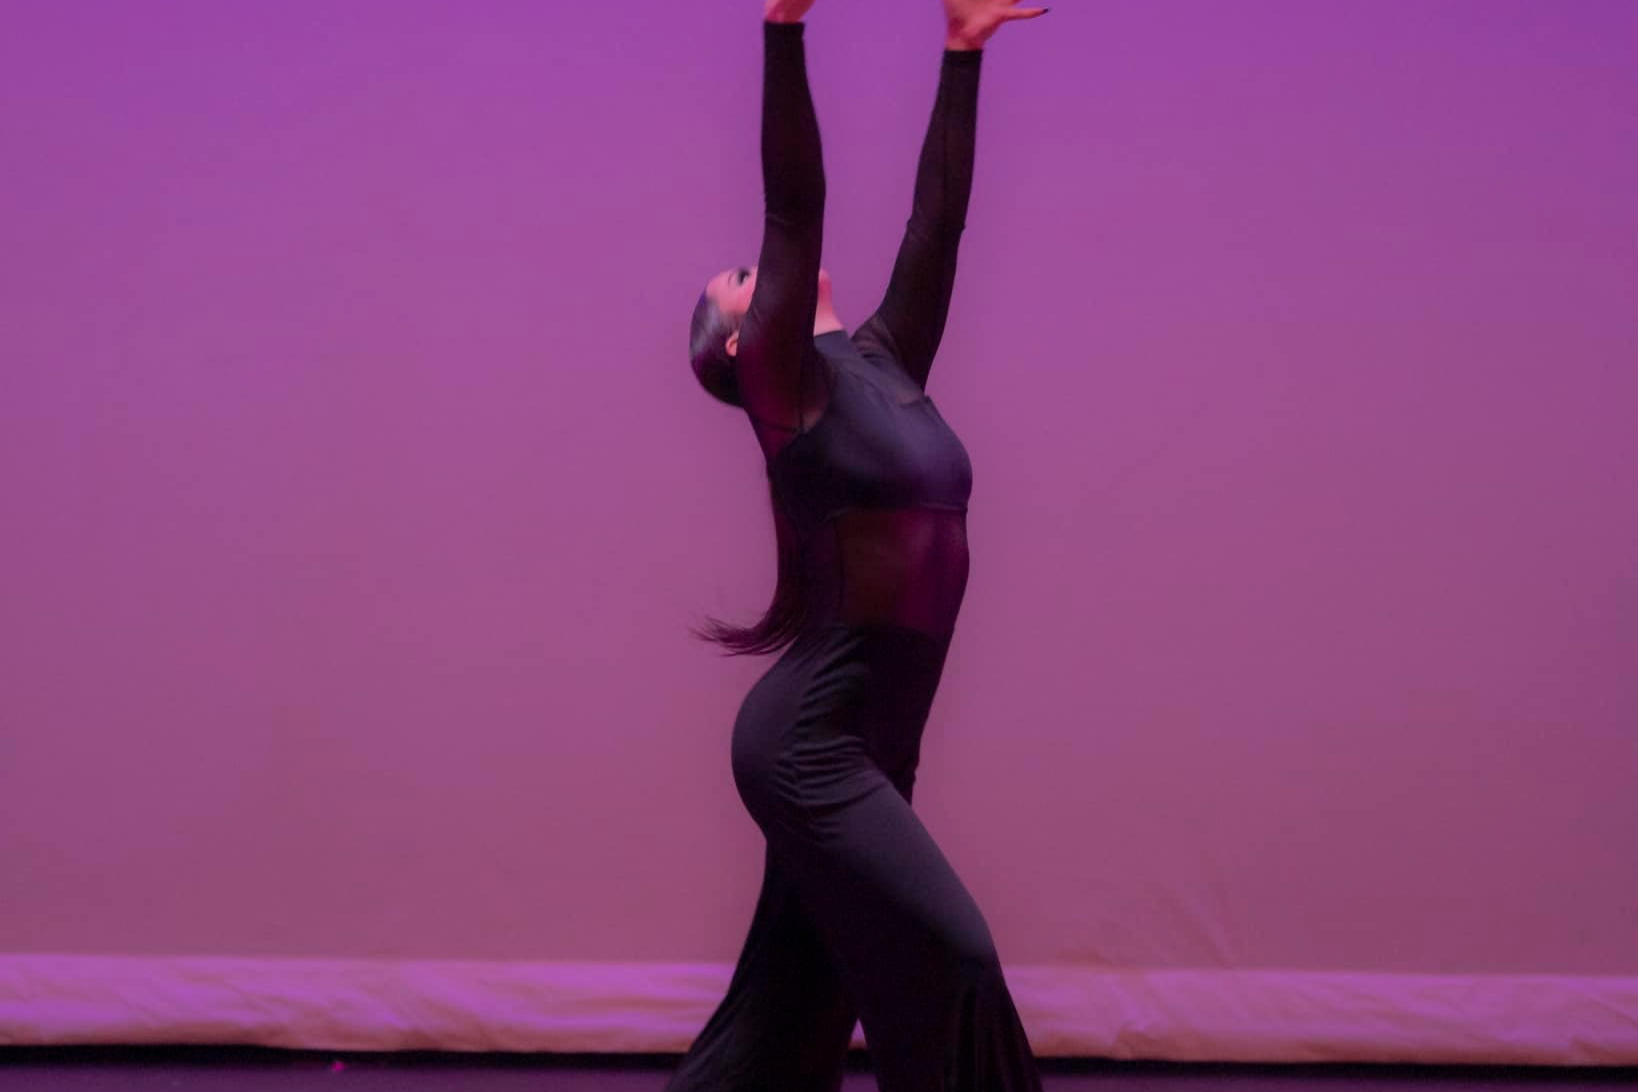 A dancer in a black outfit striking a dramatic pose with arms extended upwards against a purple-lit background on stage.